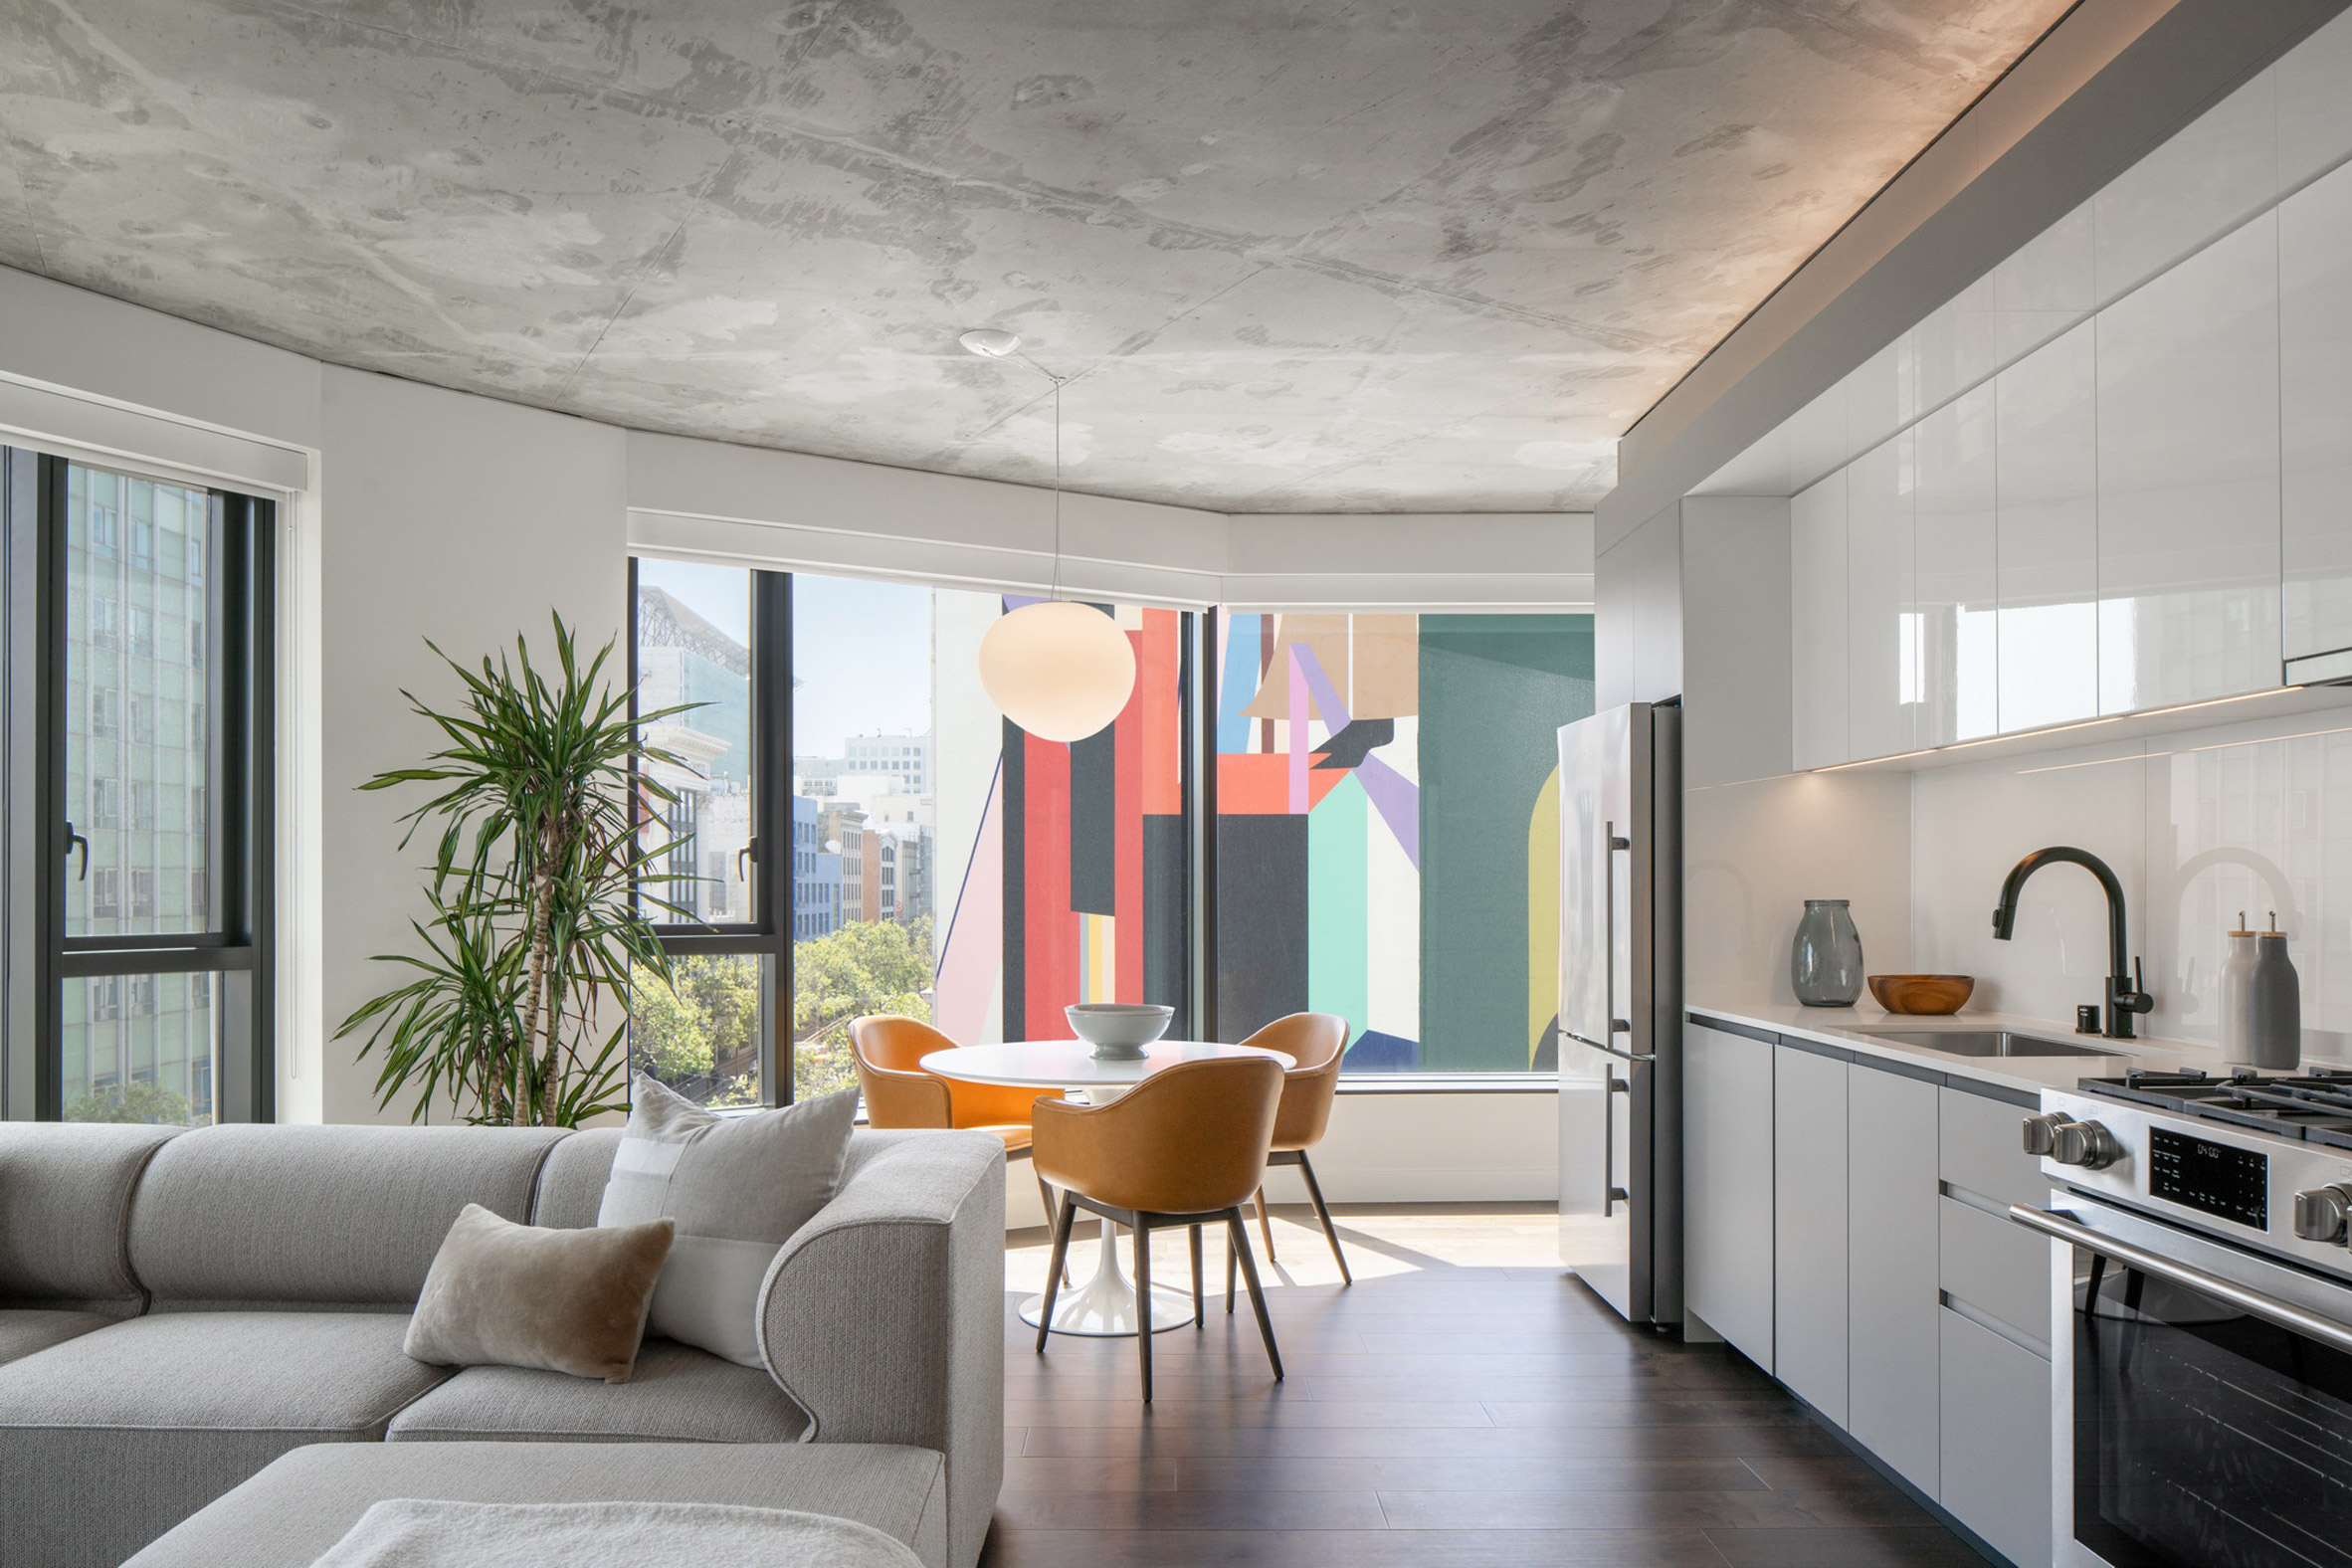 Apartment set within the Serif building in San Francisco by Handel Architects